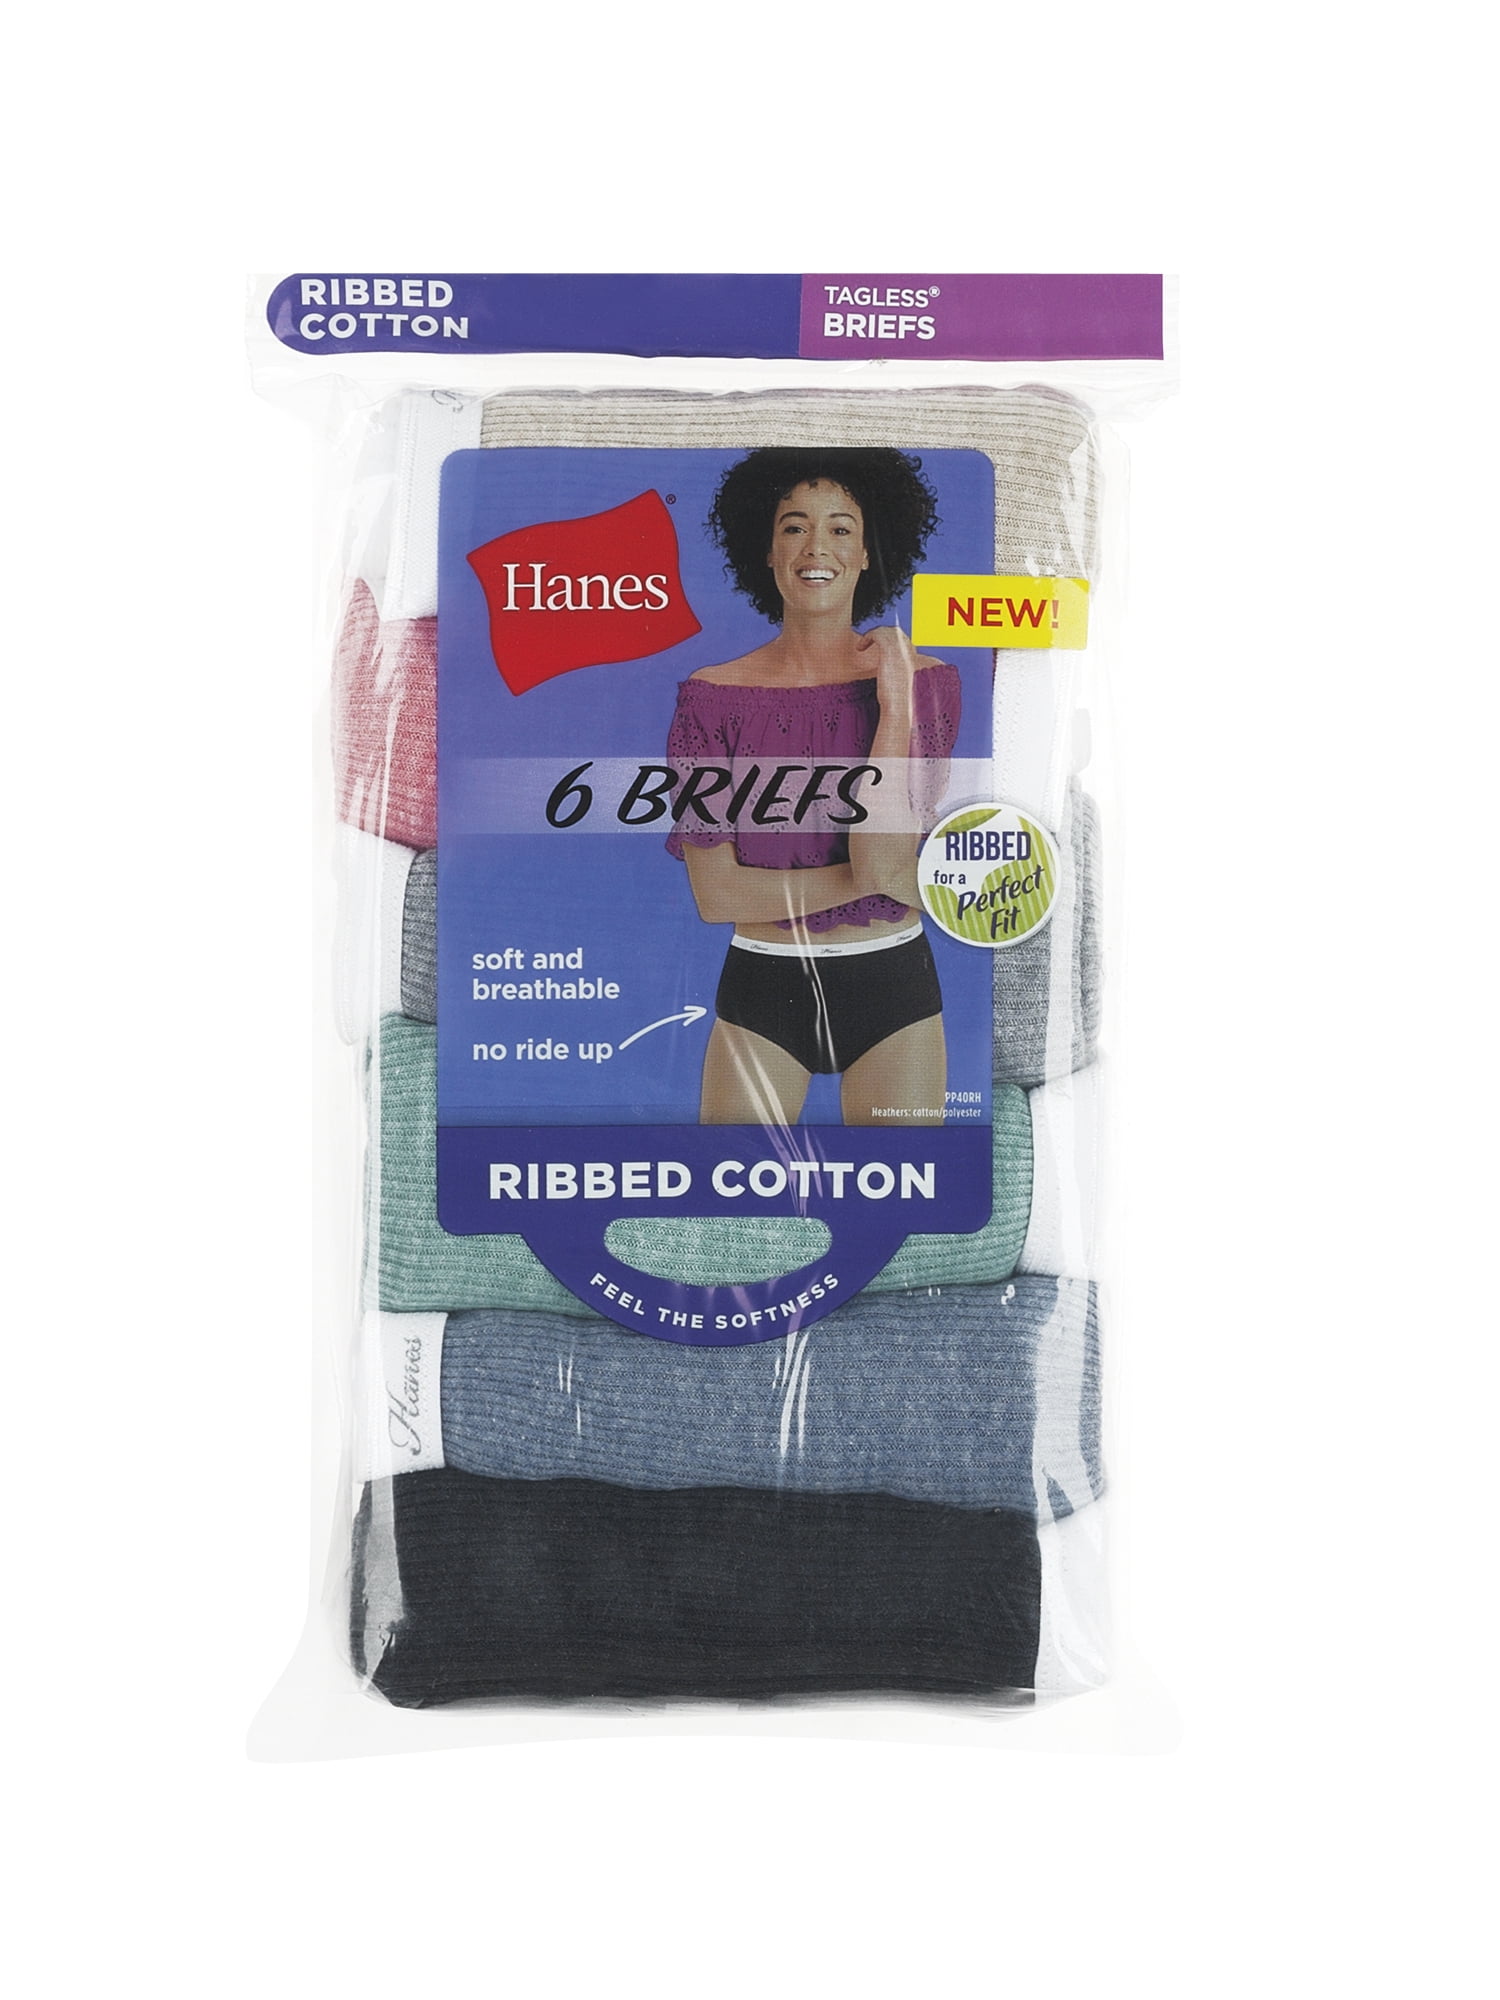 Hanes Ultimate Big Men's Cotton Briefs Underwear Pack, Assorted Solids, 6- Pack (Big & Tall Sizes)